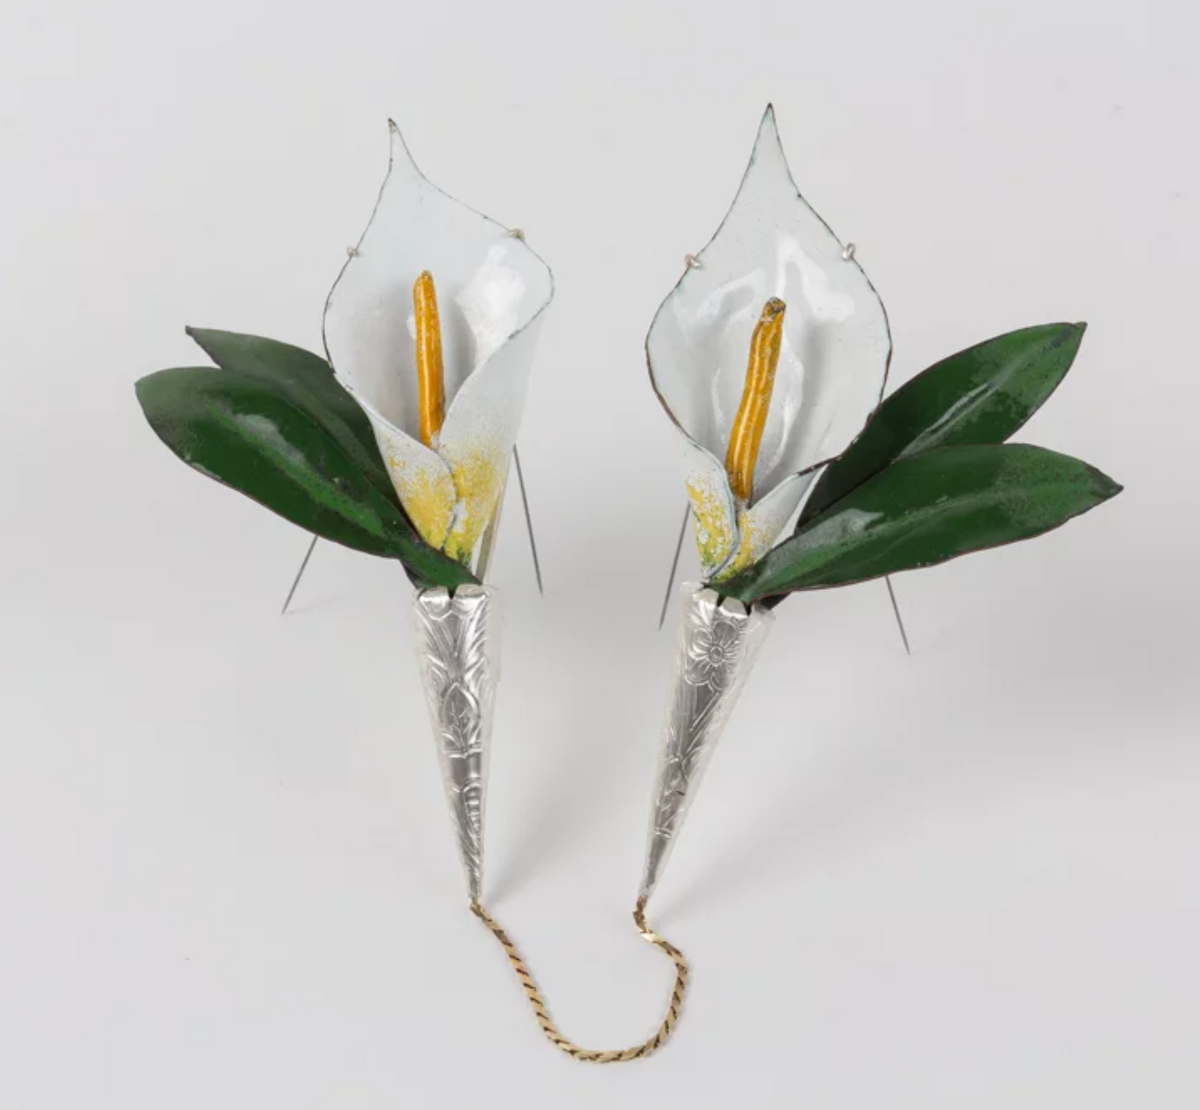 Enameled brooch with two three dimensional lilies connected by a gold chain titled "Intimacy" (Materials: copper, enamel, silver, 24k gold, steel pin stem; size: 7” x 5.5” x 1”; year: 2019)